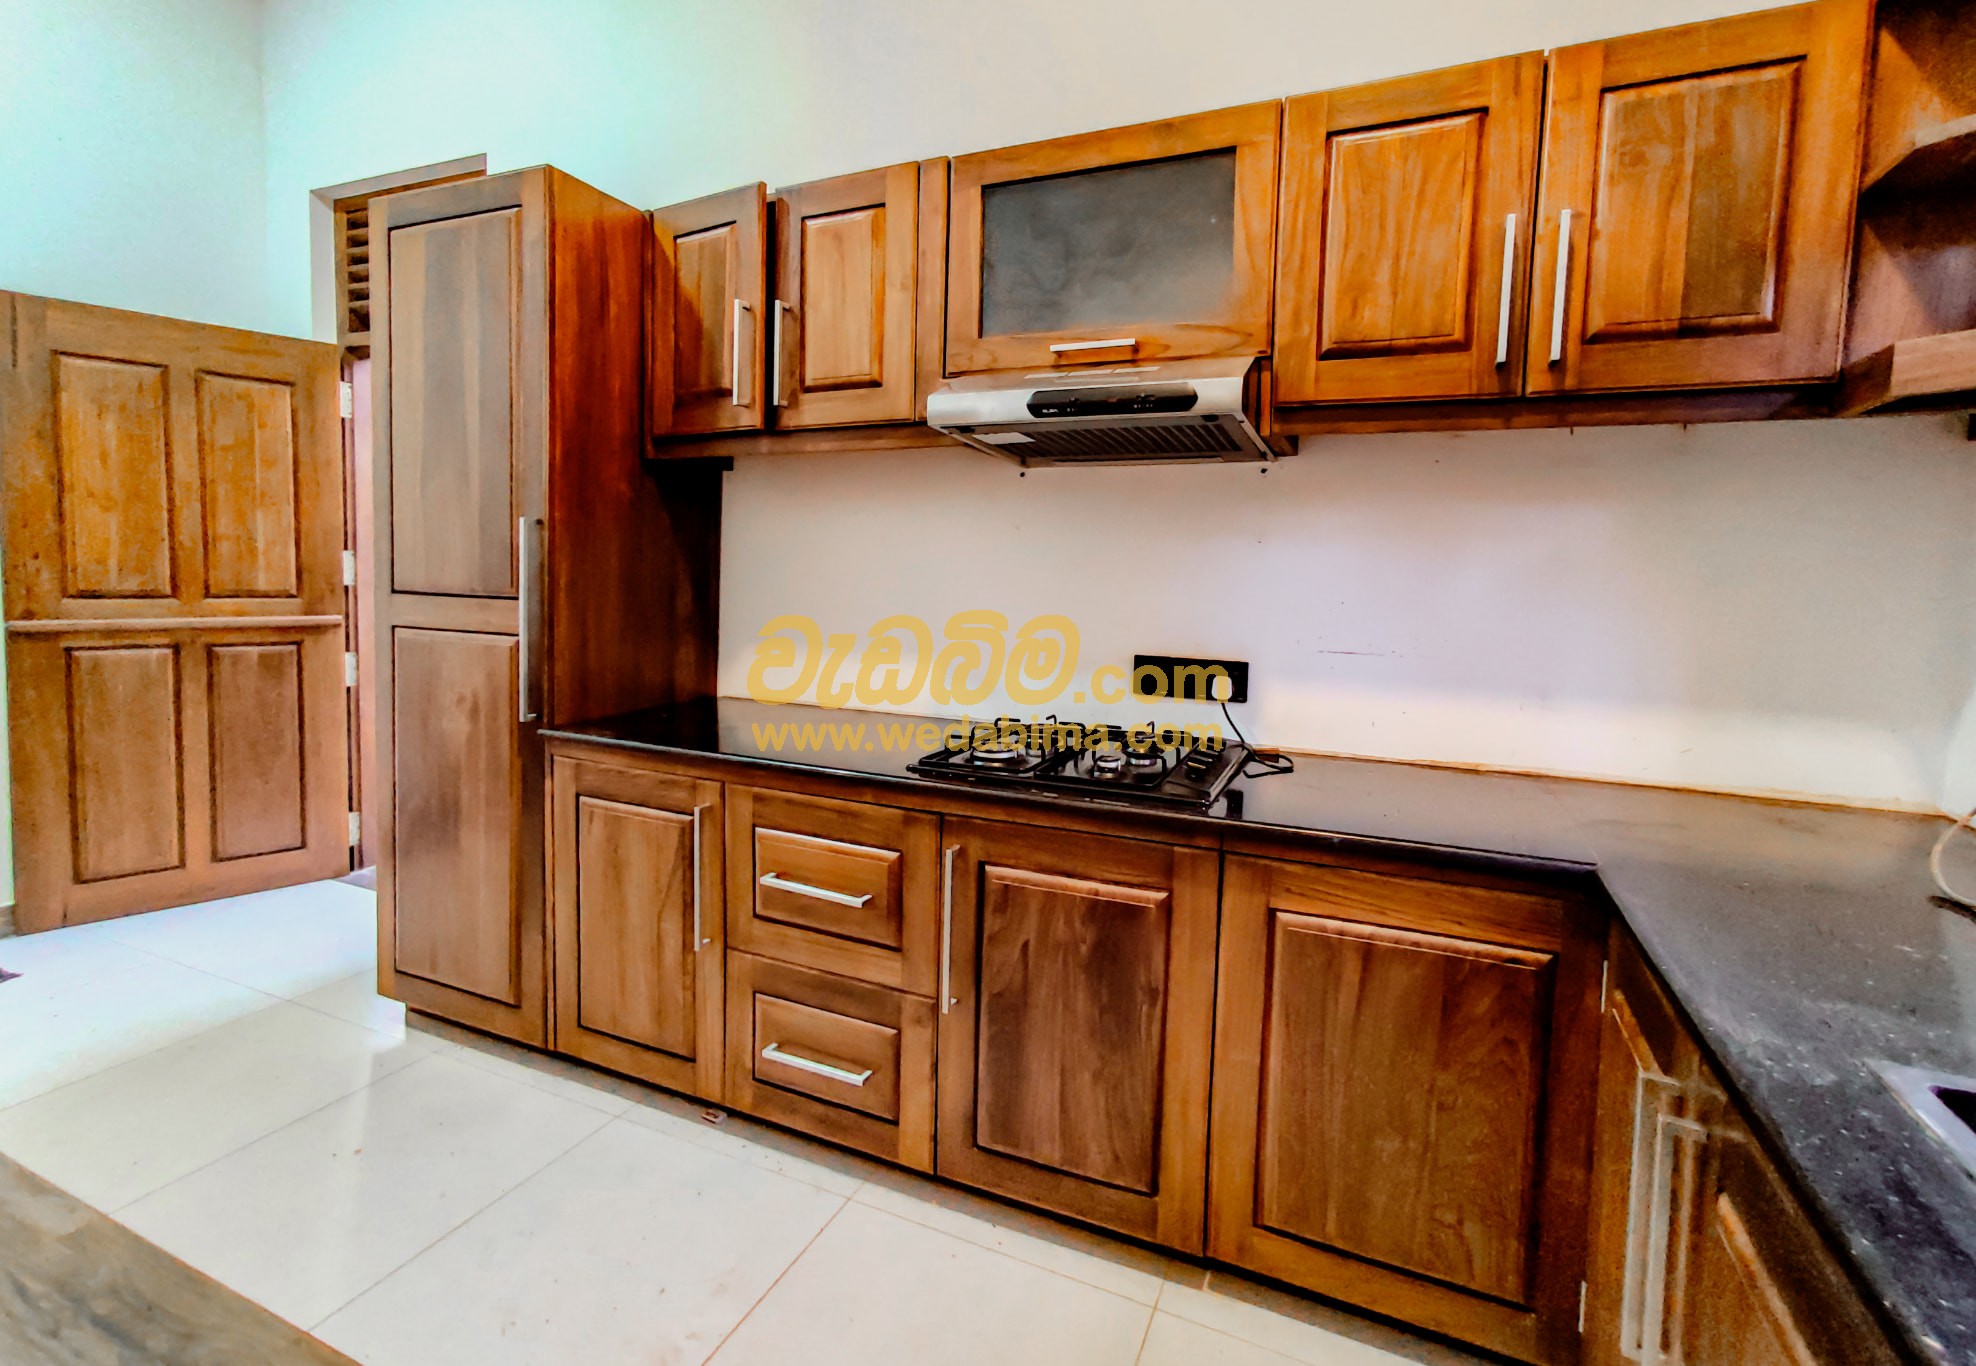 Cover image for Wooden Pantry Cupboards Kandy price in Sri Lanka